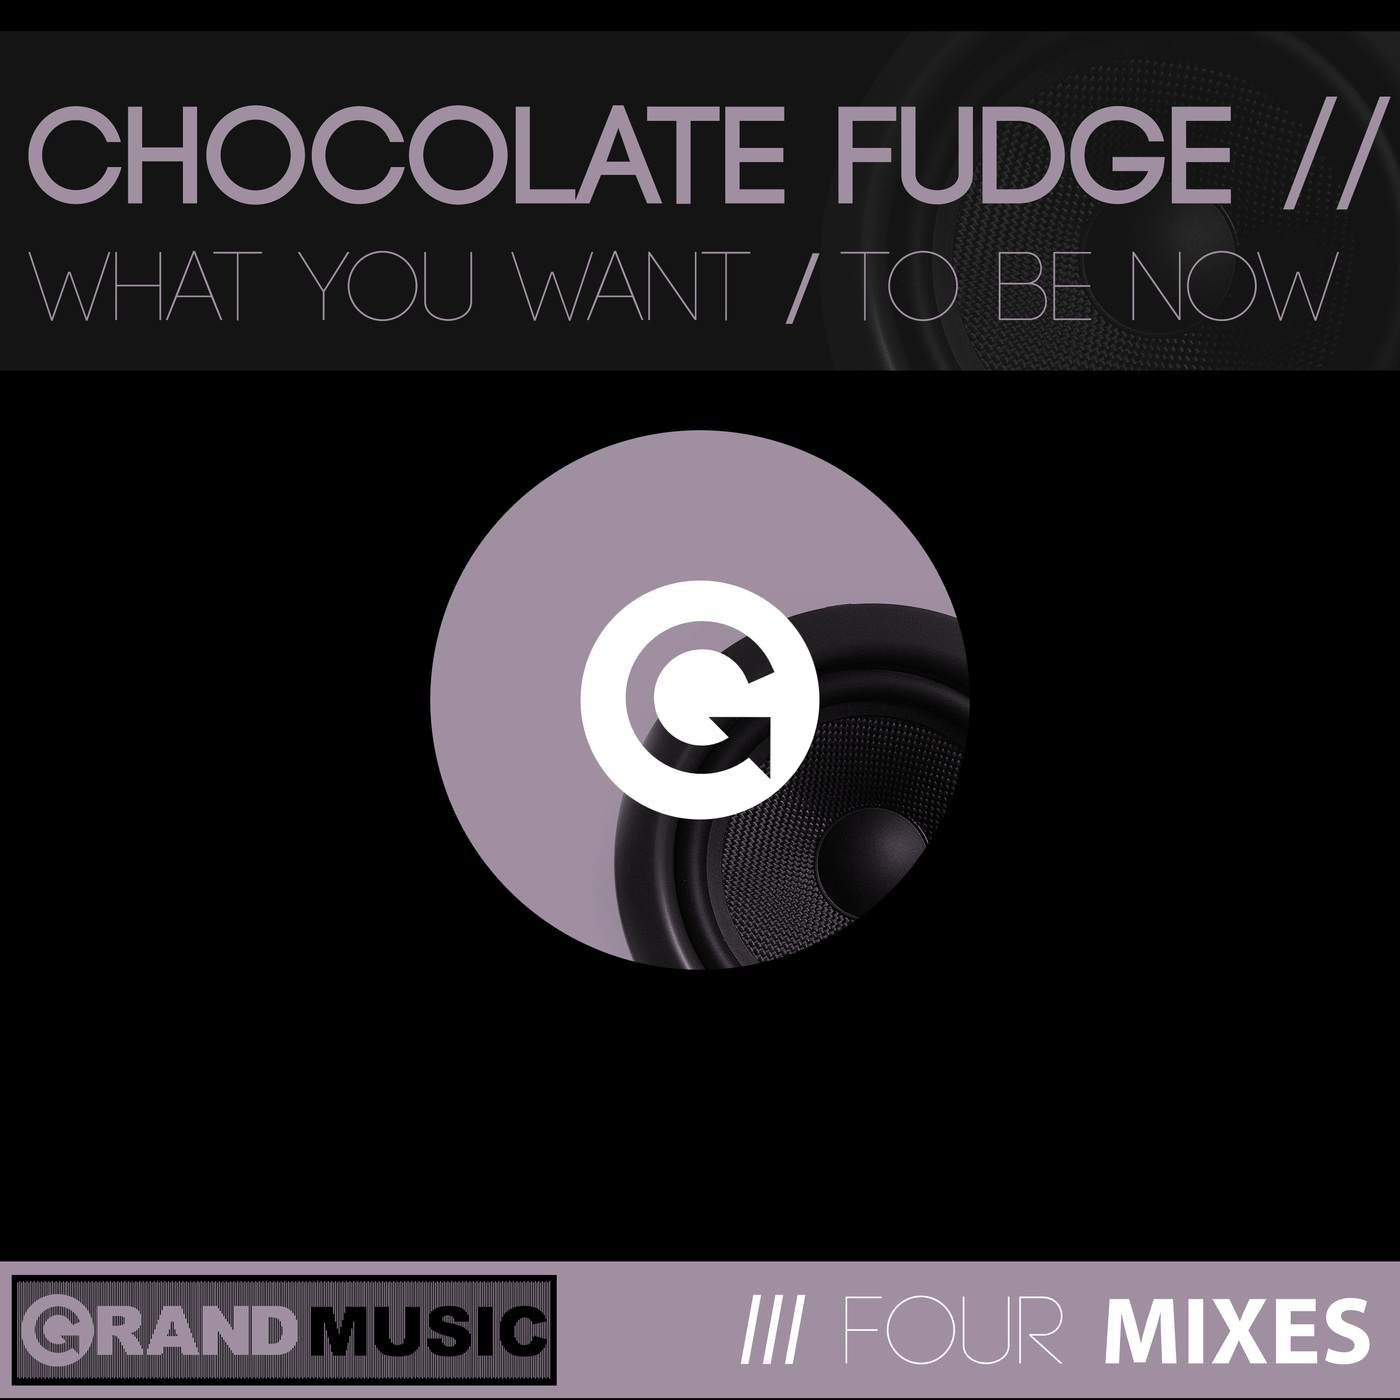 Chocolate Fudge - What You Want / To Be Now / GRAND Music